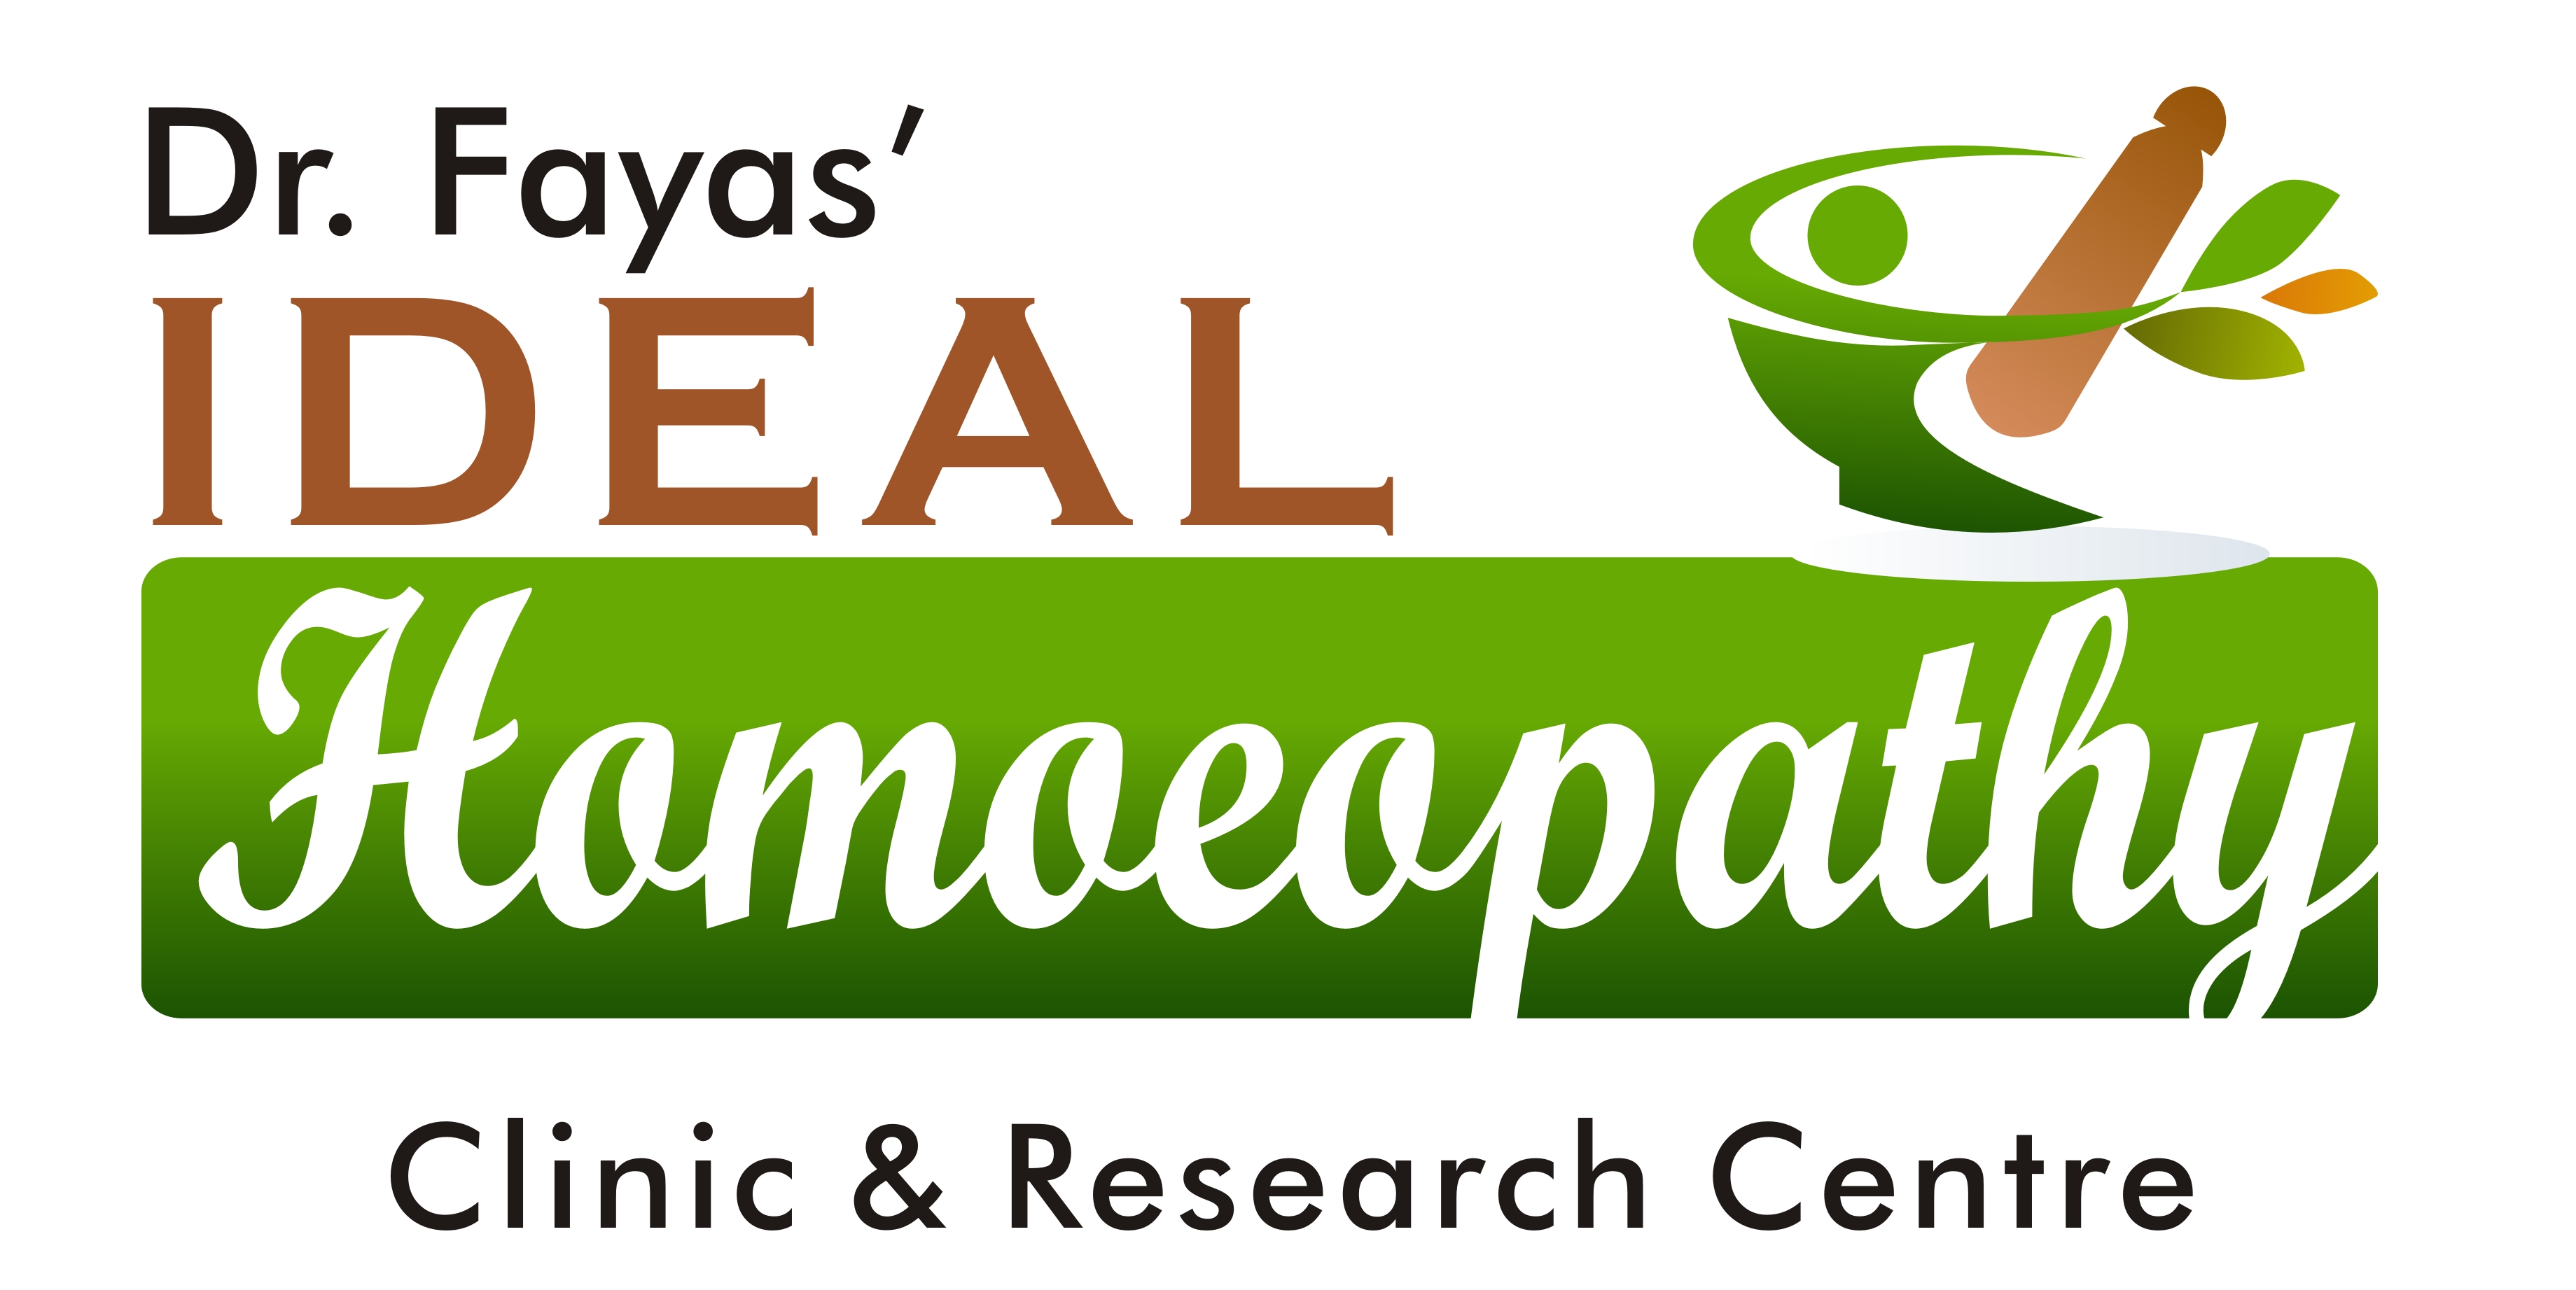 Dr. Fayas Ideal Homoeopathy - Clinic & Research Centre